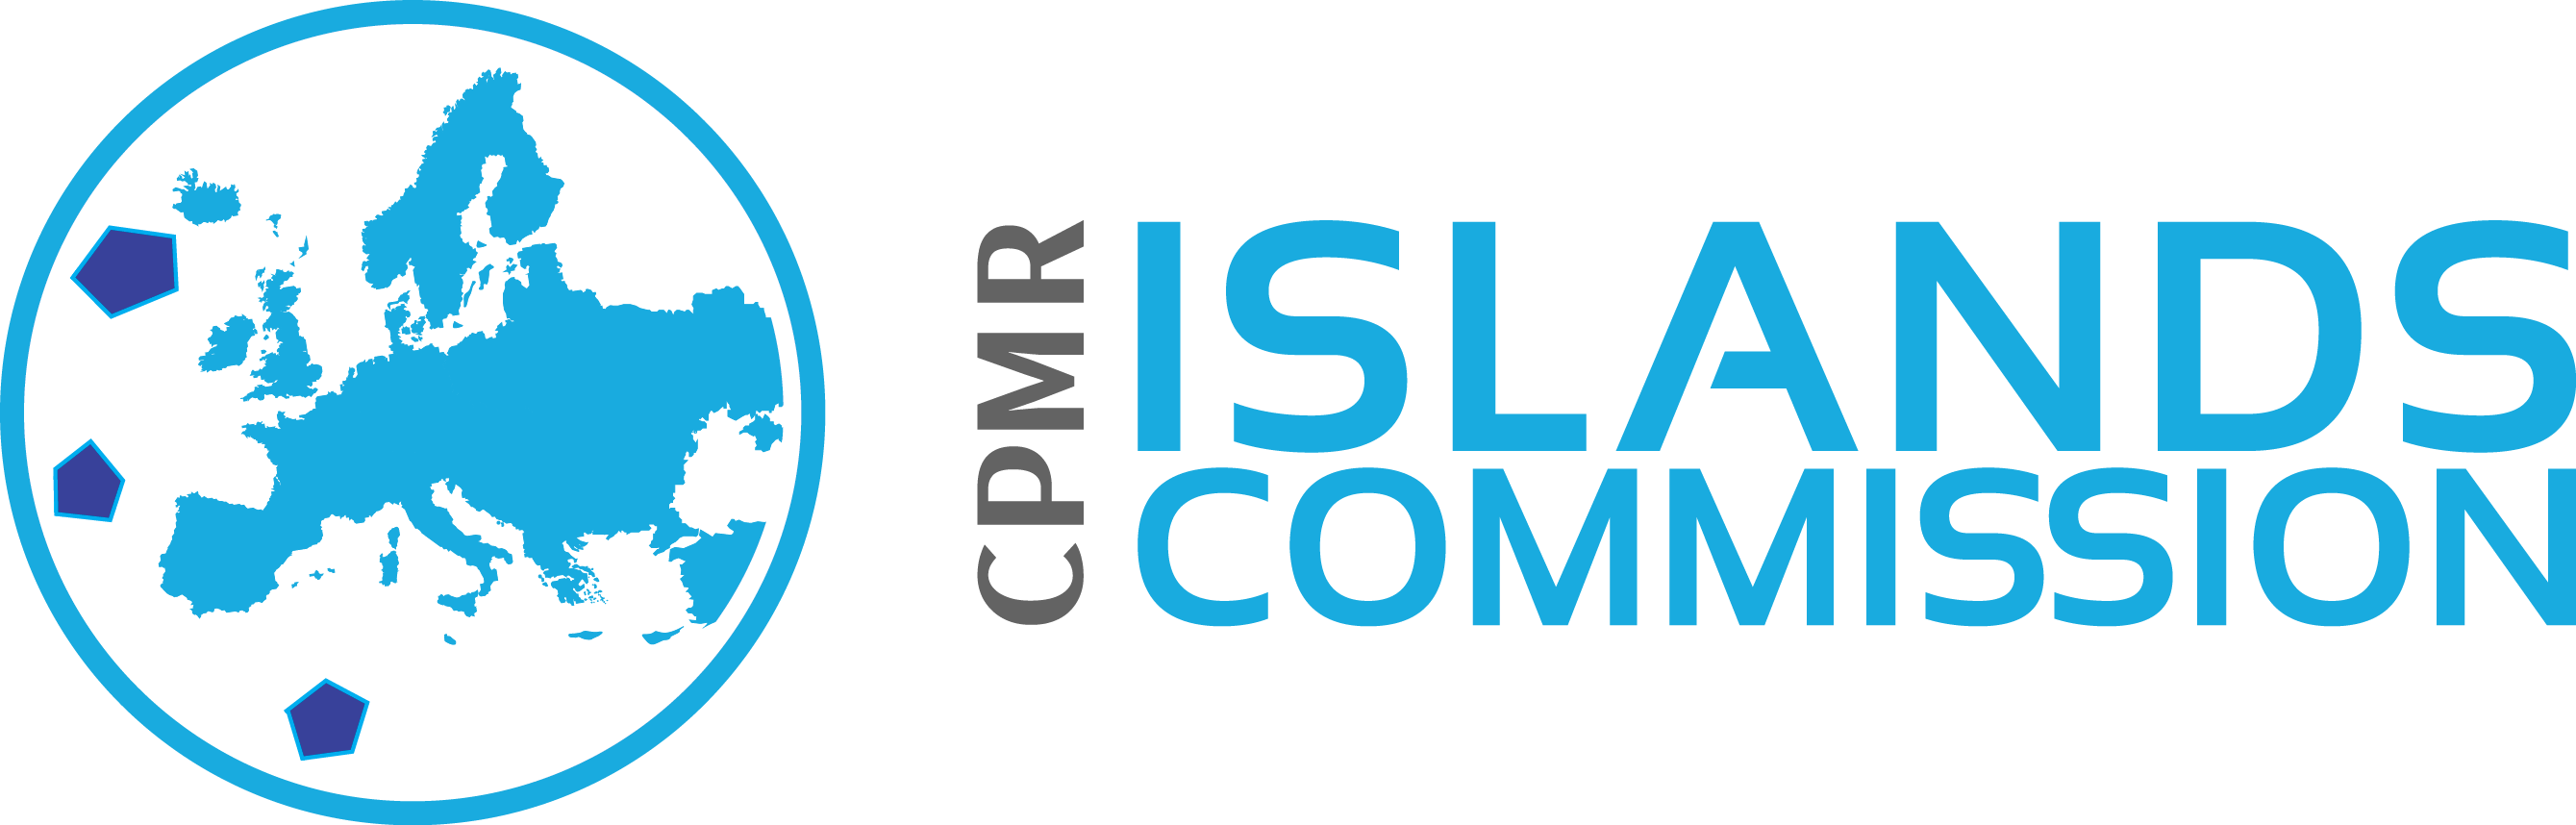 CPMR Islands Commission